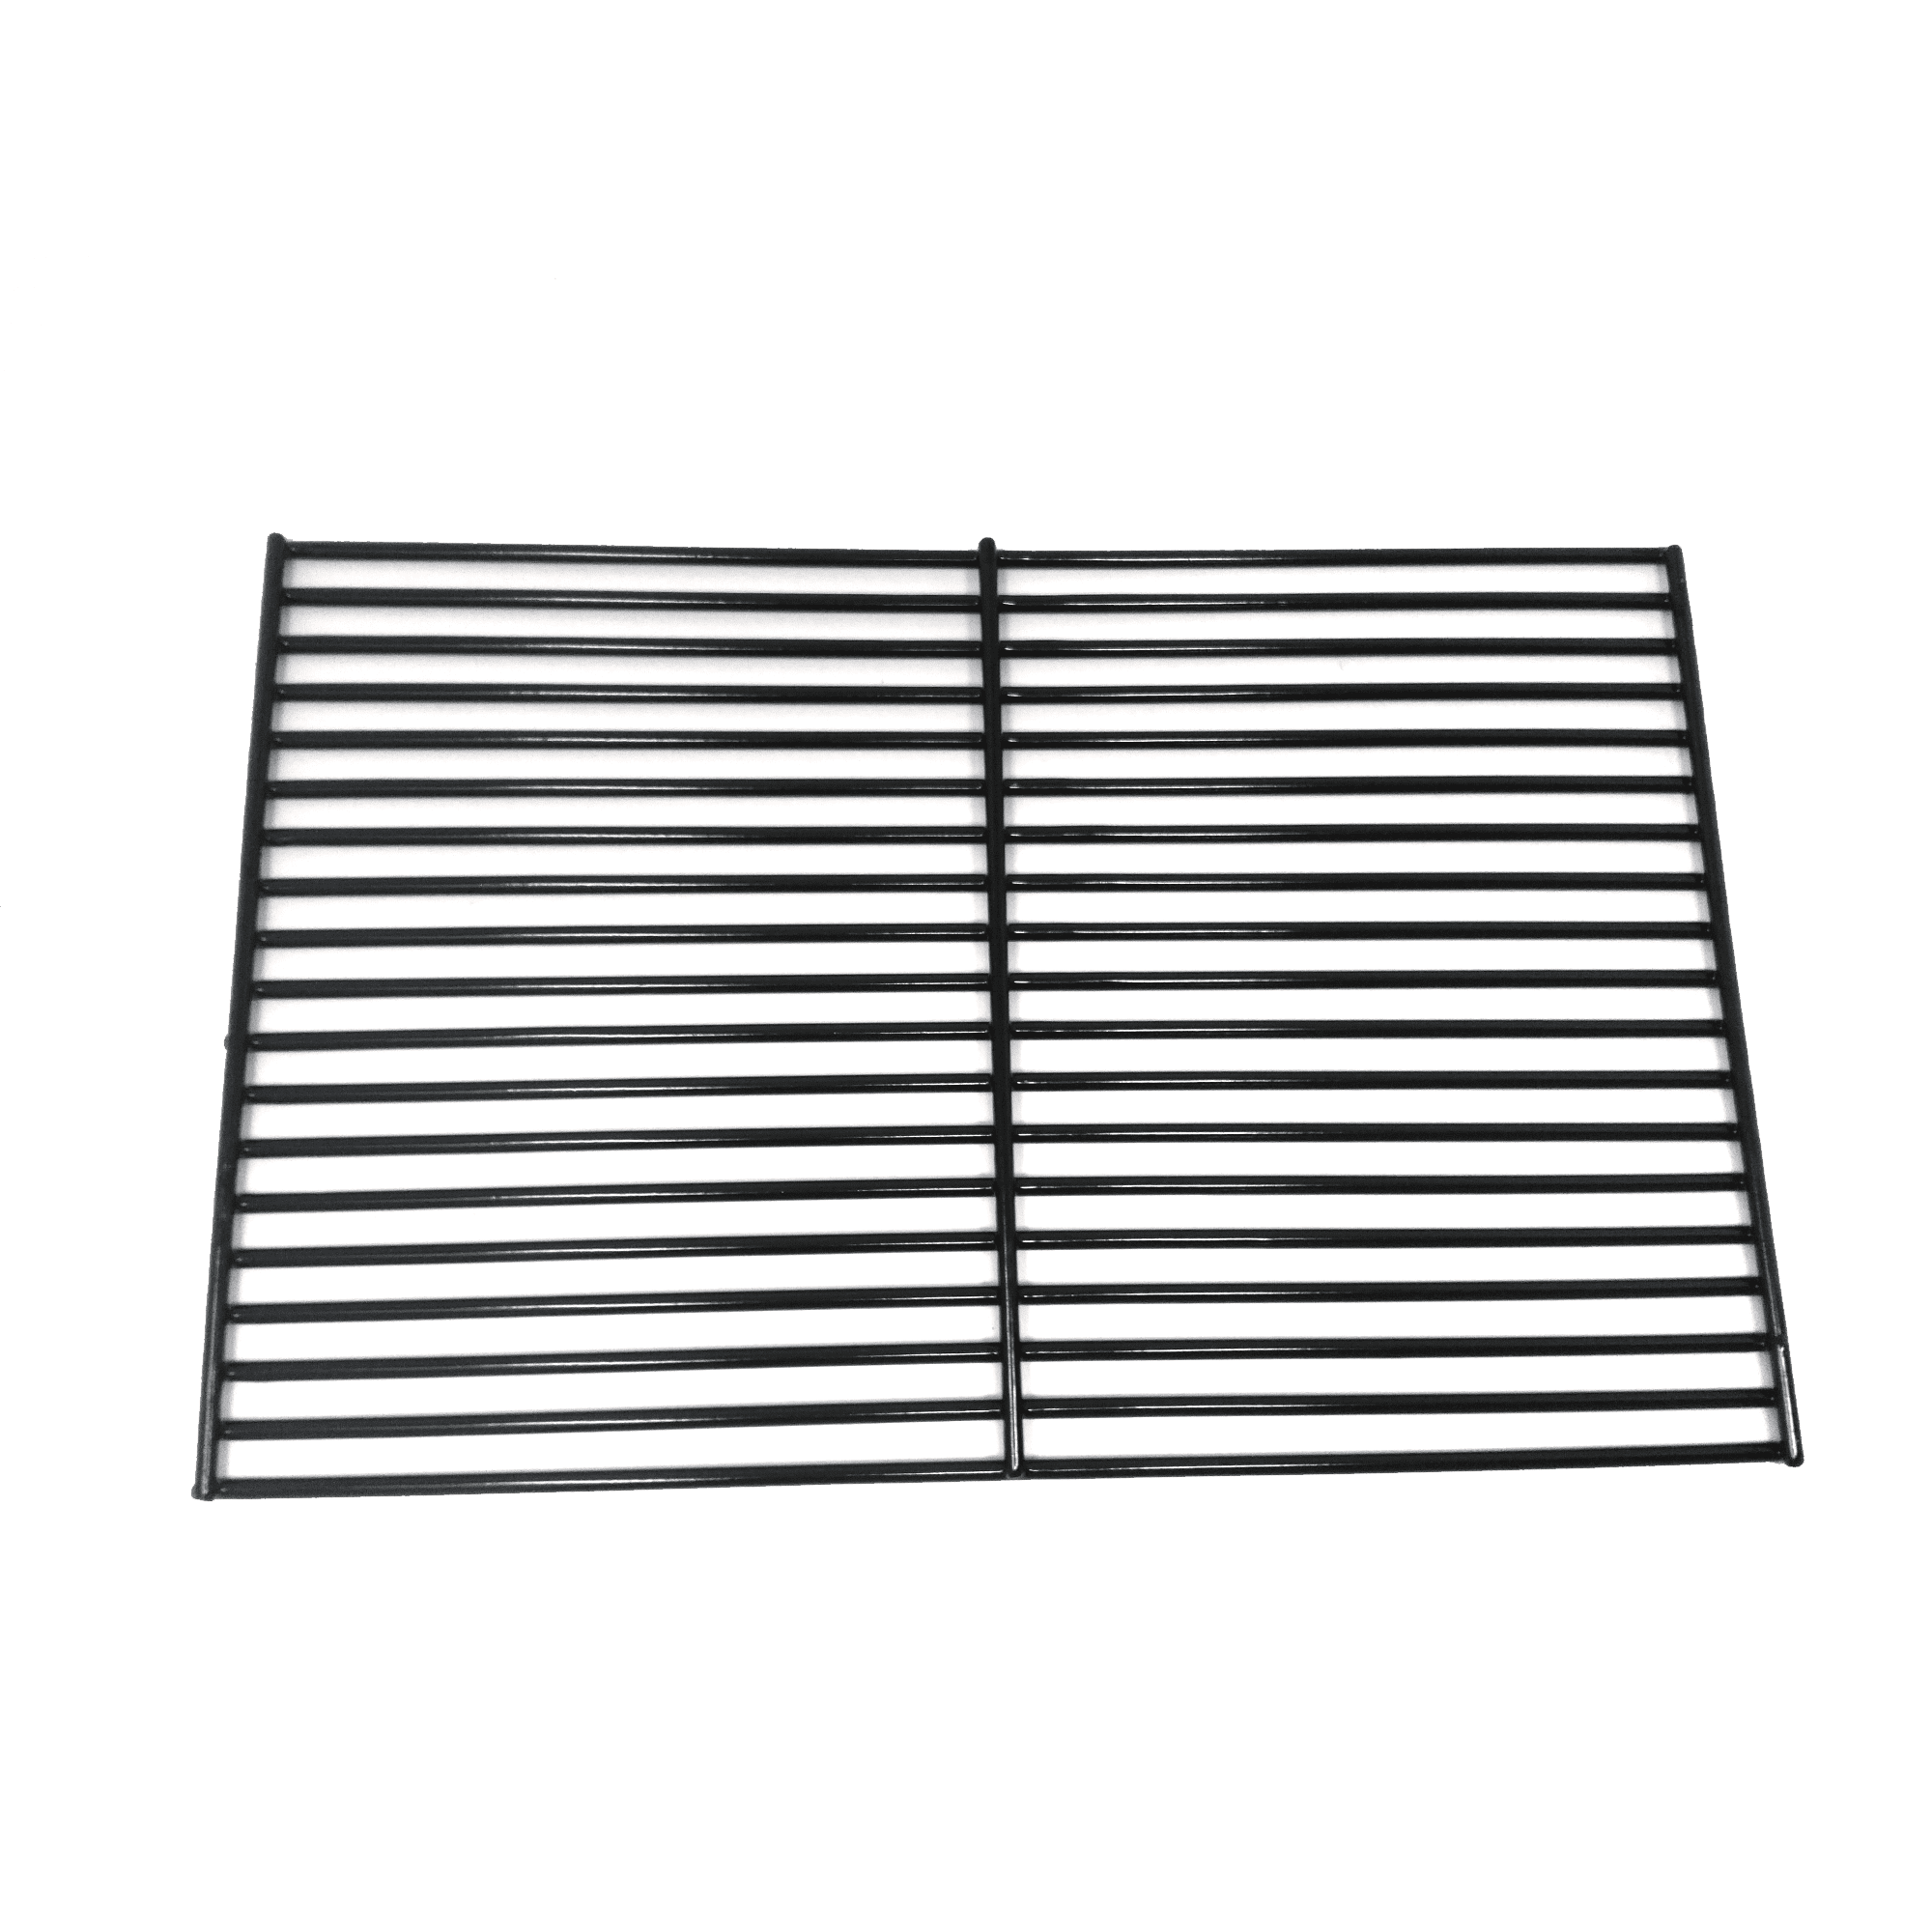 2 Pc 19.4 Cast Iron Cooking Grate for Pit Boss PB700 Series Pellet Smoker  Grill